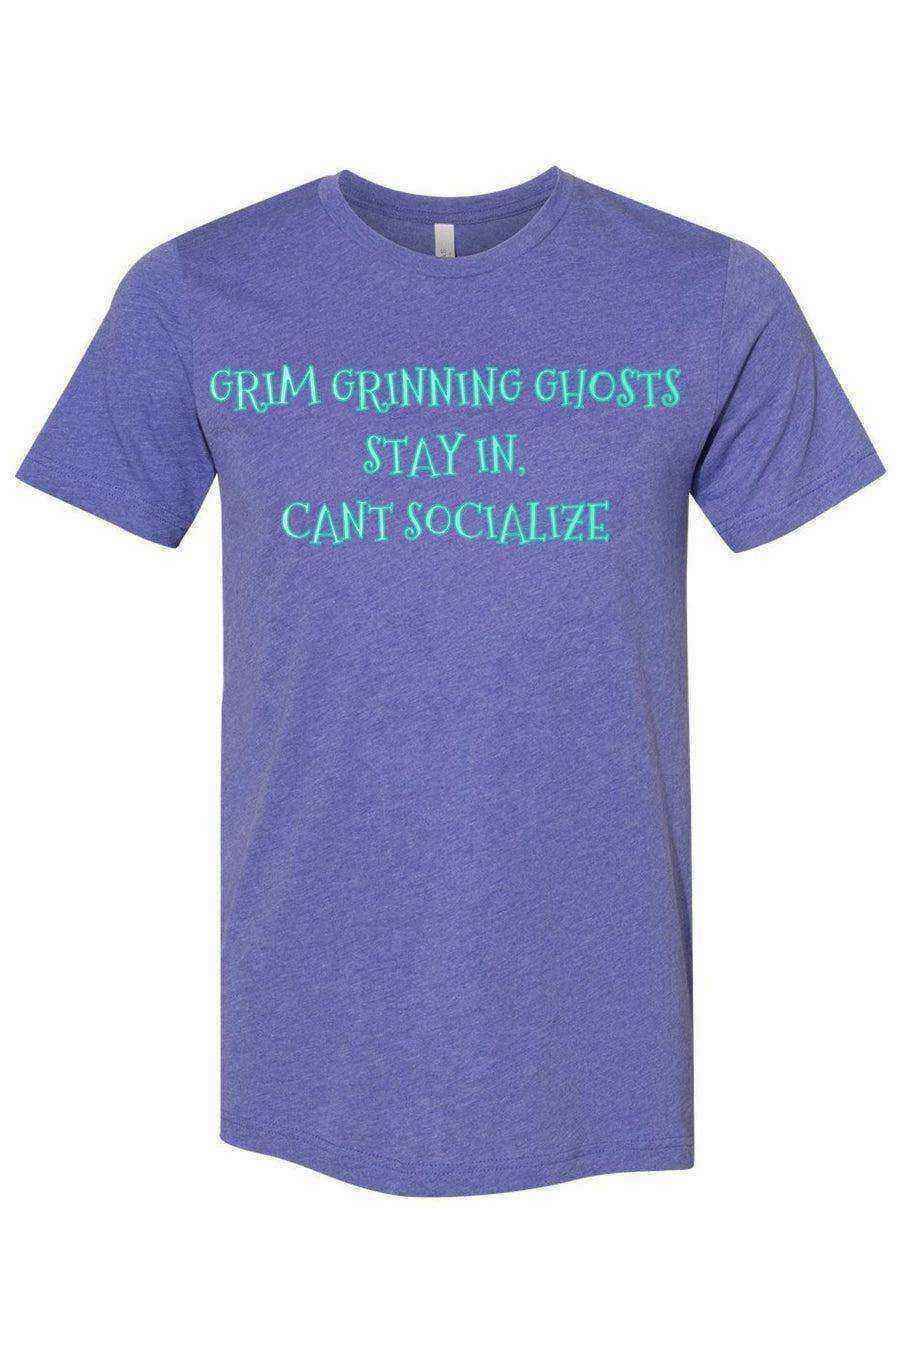 Toddler | Grim Grinning Ghosts Stay In Can’t Socialize Shirt | Haunted Mansion | Social Distance - Dylan's Tees